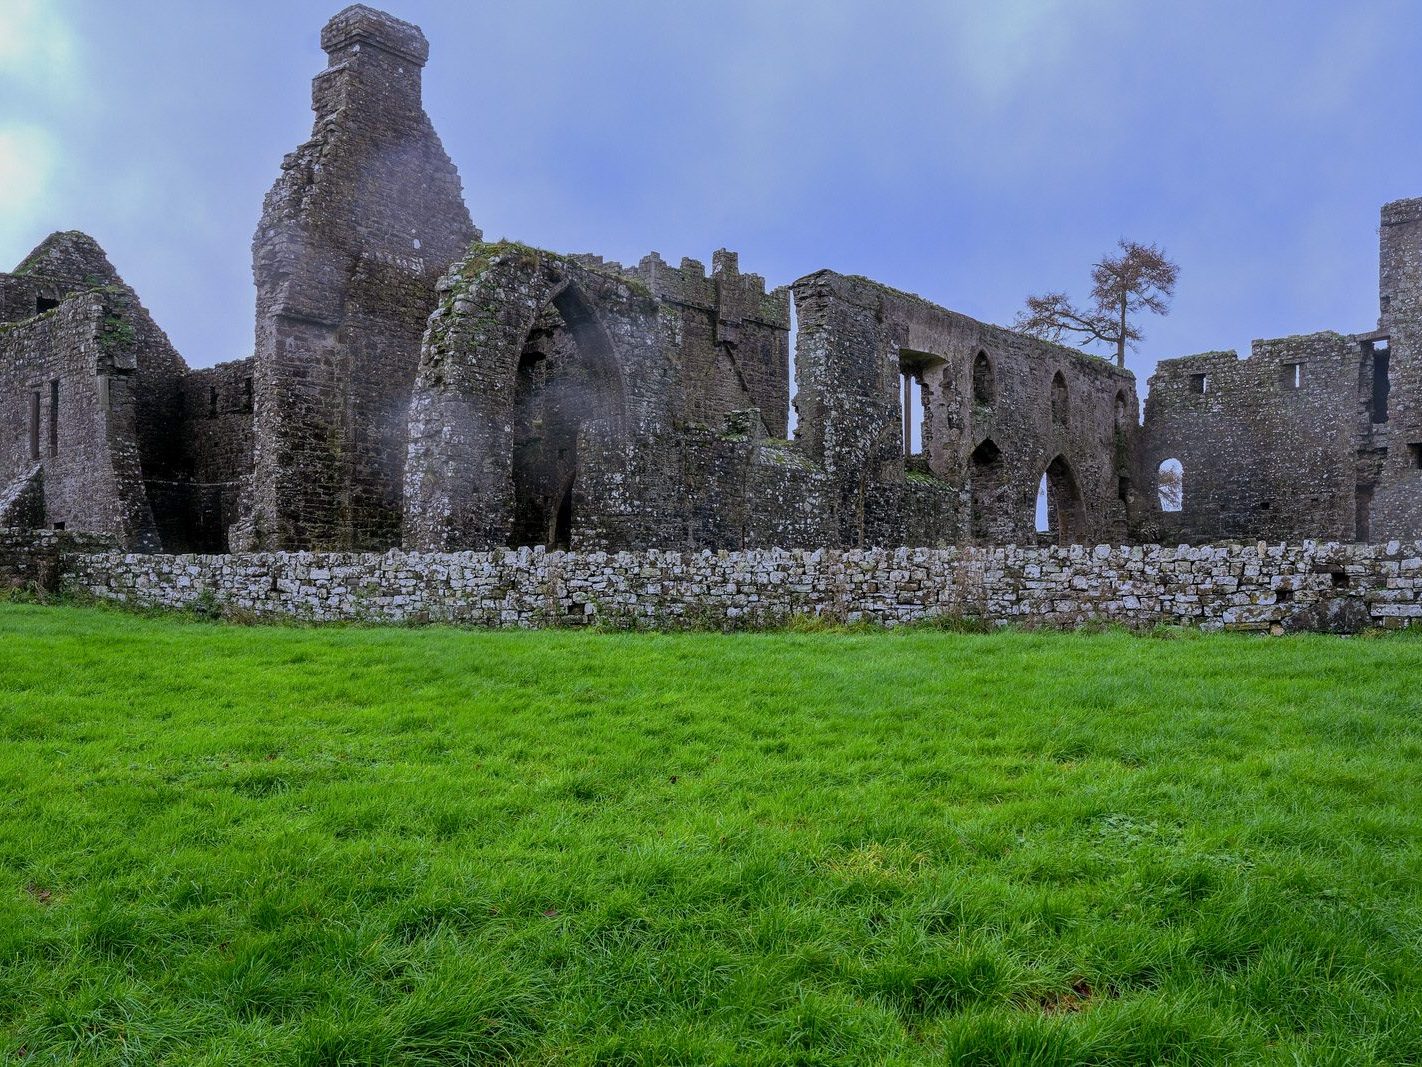 BECTIVE ABBEY WHICH I VISITED LAST CHRISTMAS [THERE WERE NO OTHER VISITORS AS IT WAS A VERY WET DAY]--225241-1